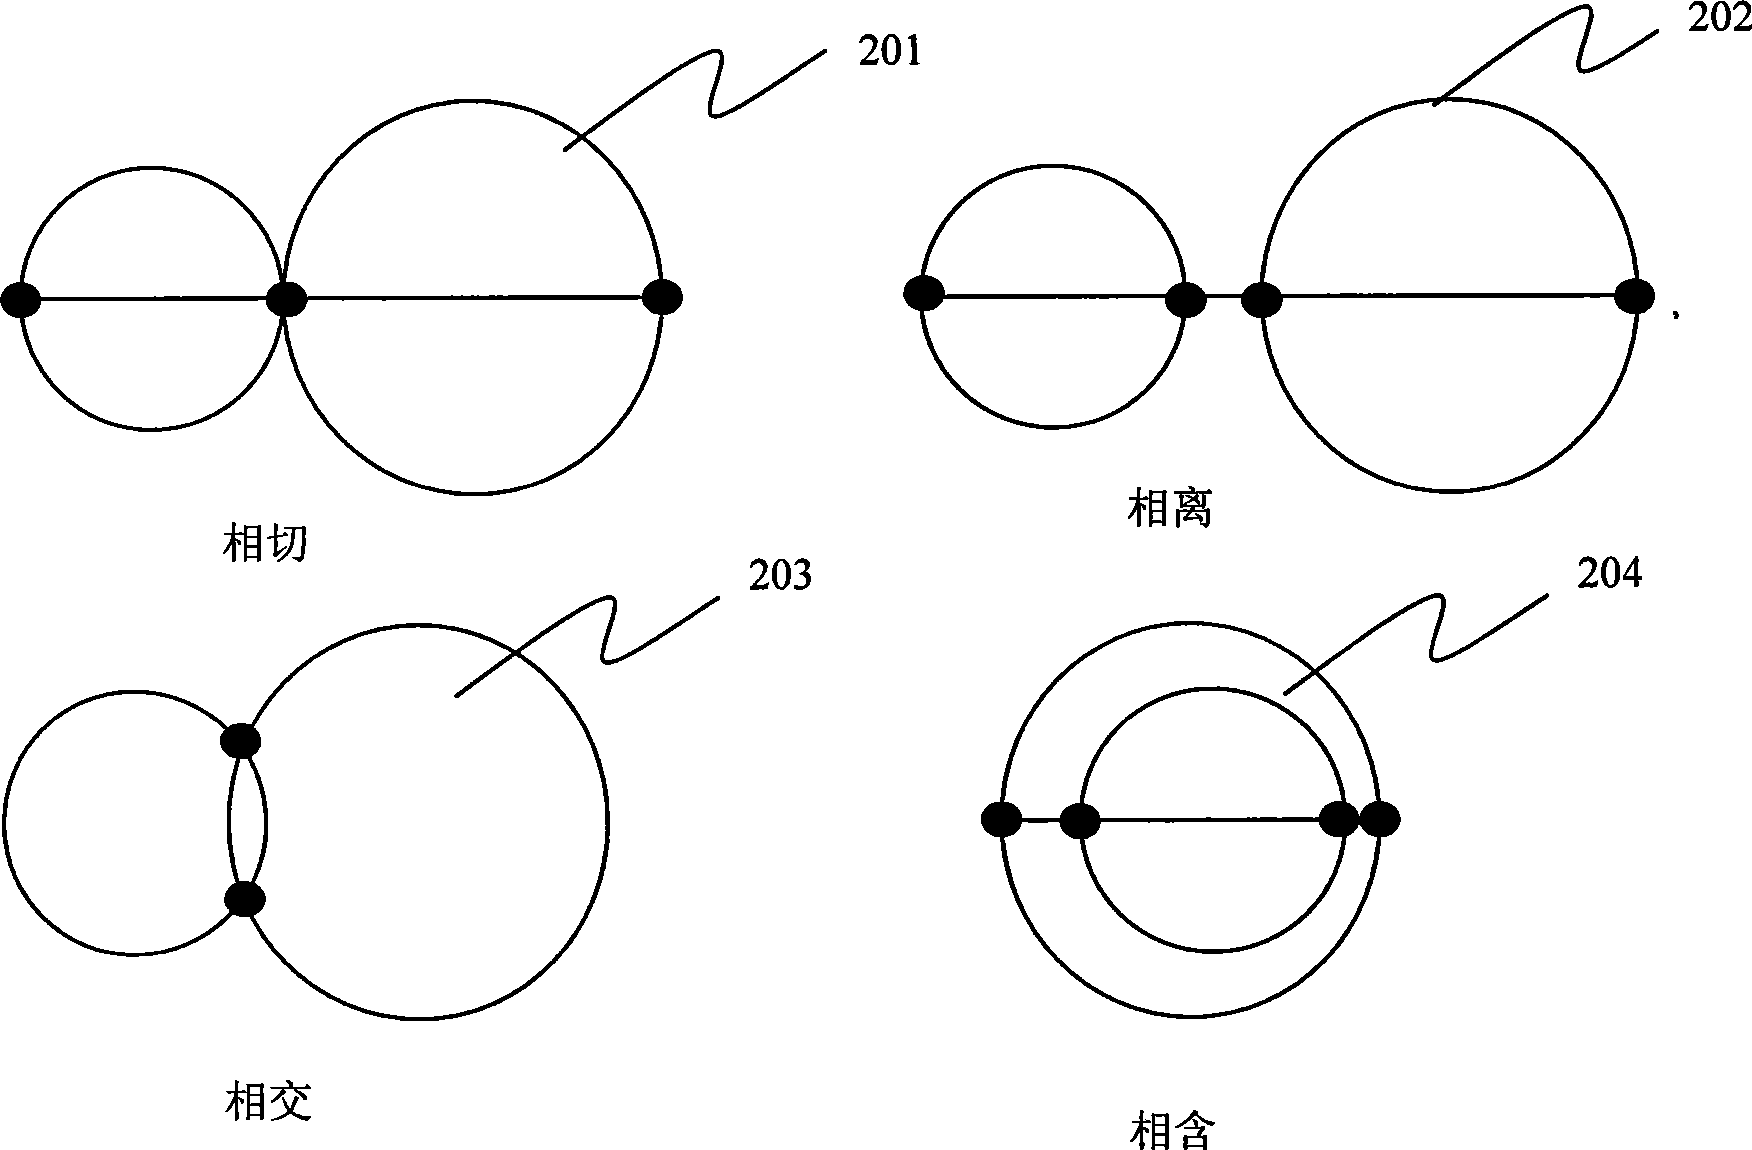 Method for realizing precise geometrical positioning in wireless network